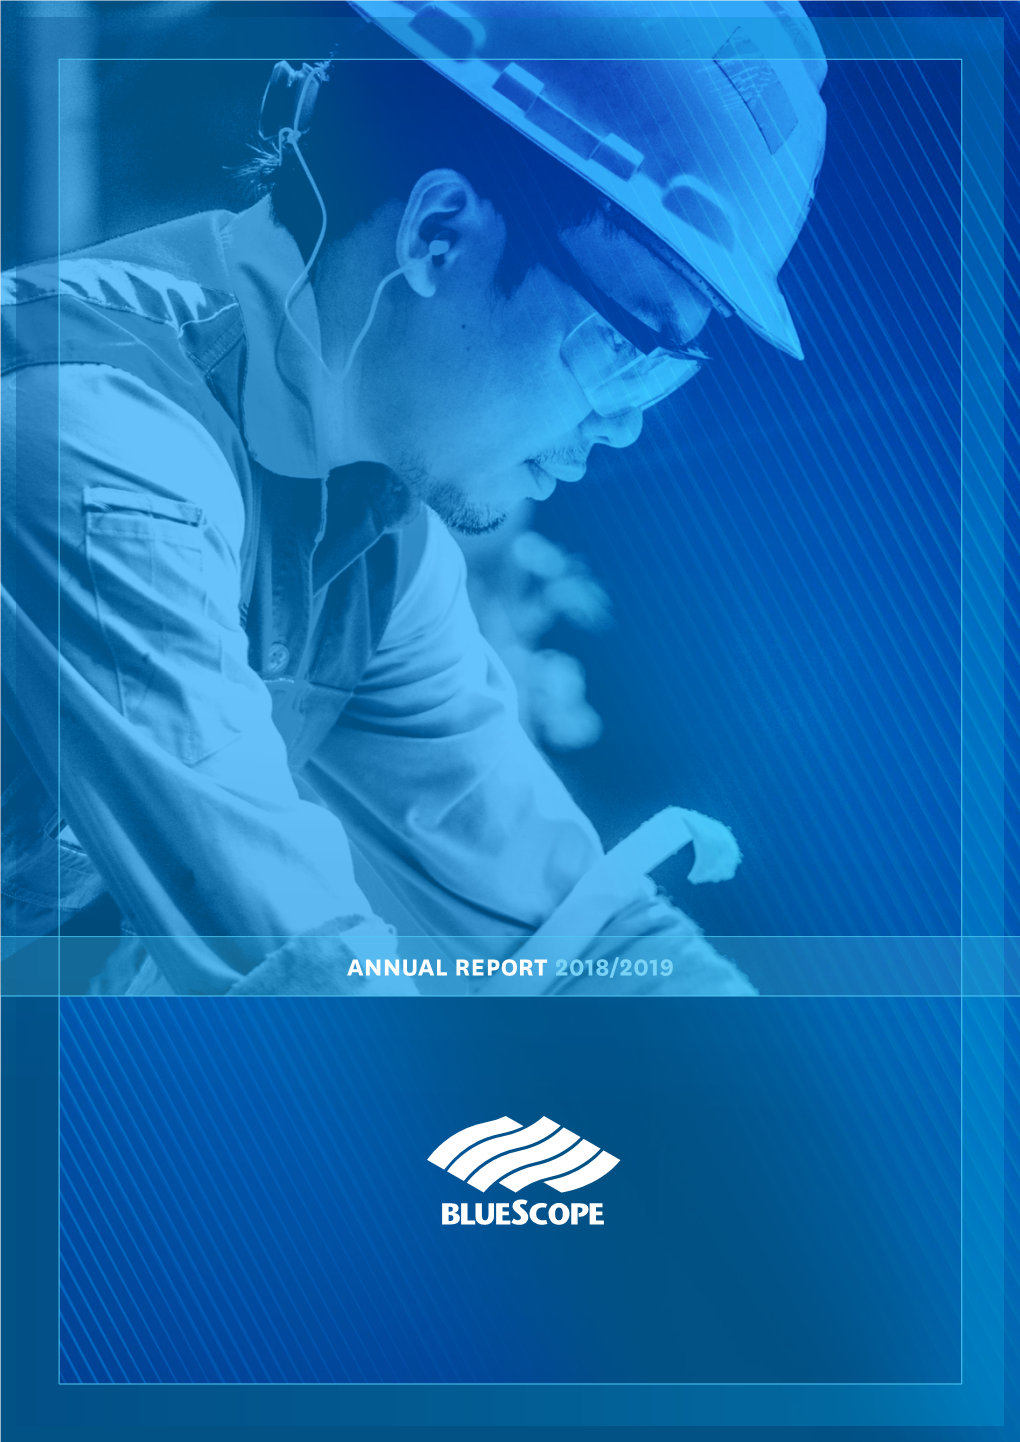 ANNUAL REPORT 2018/2019 Bluescope Steel Limited ABN 16 000 011 058 CHAIRMAN’S MESSAGE